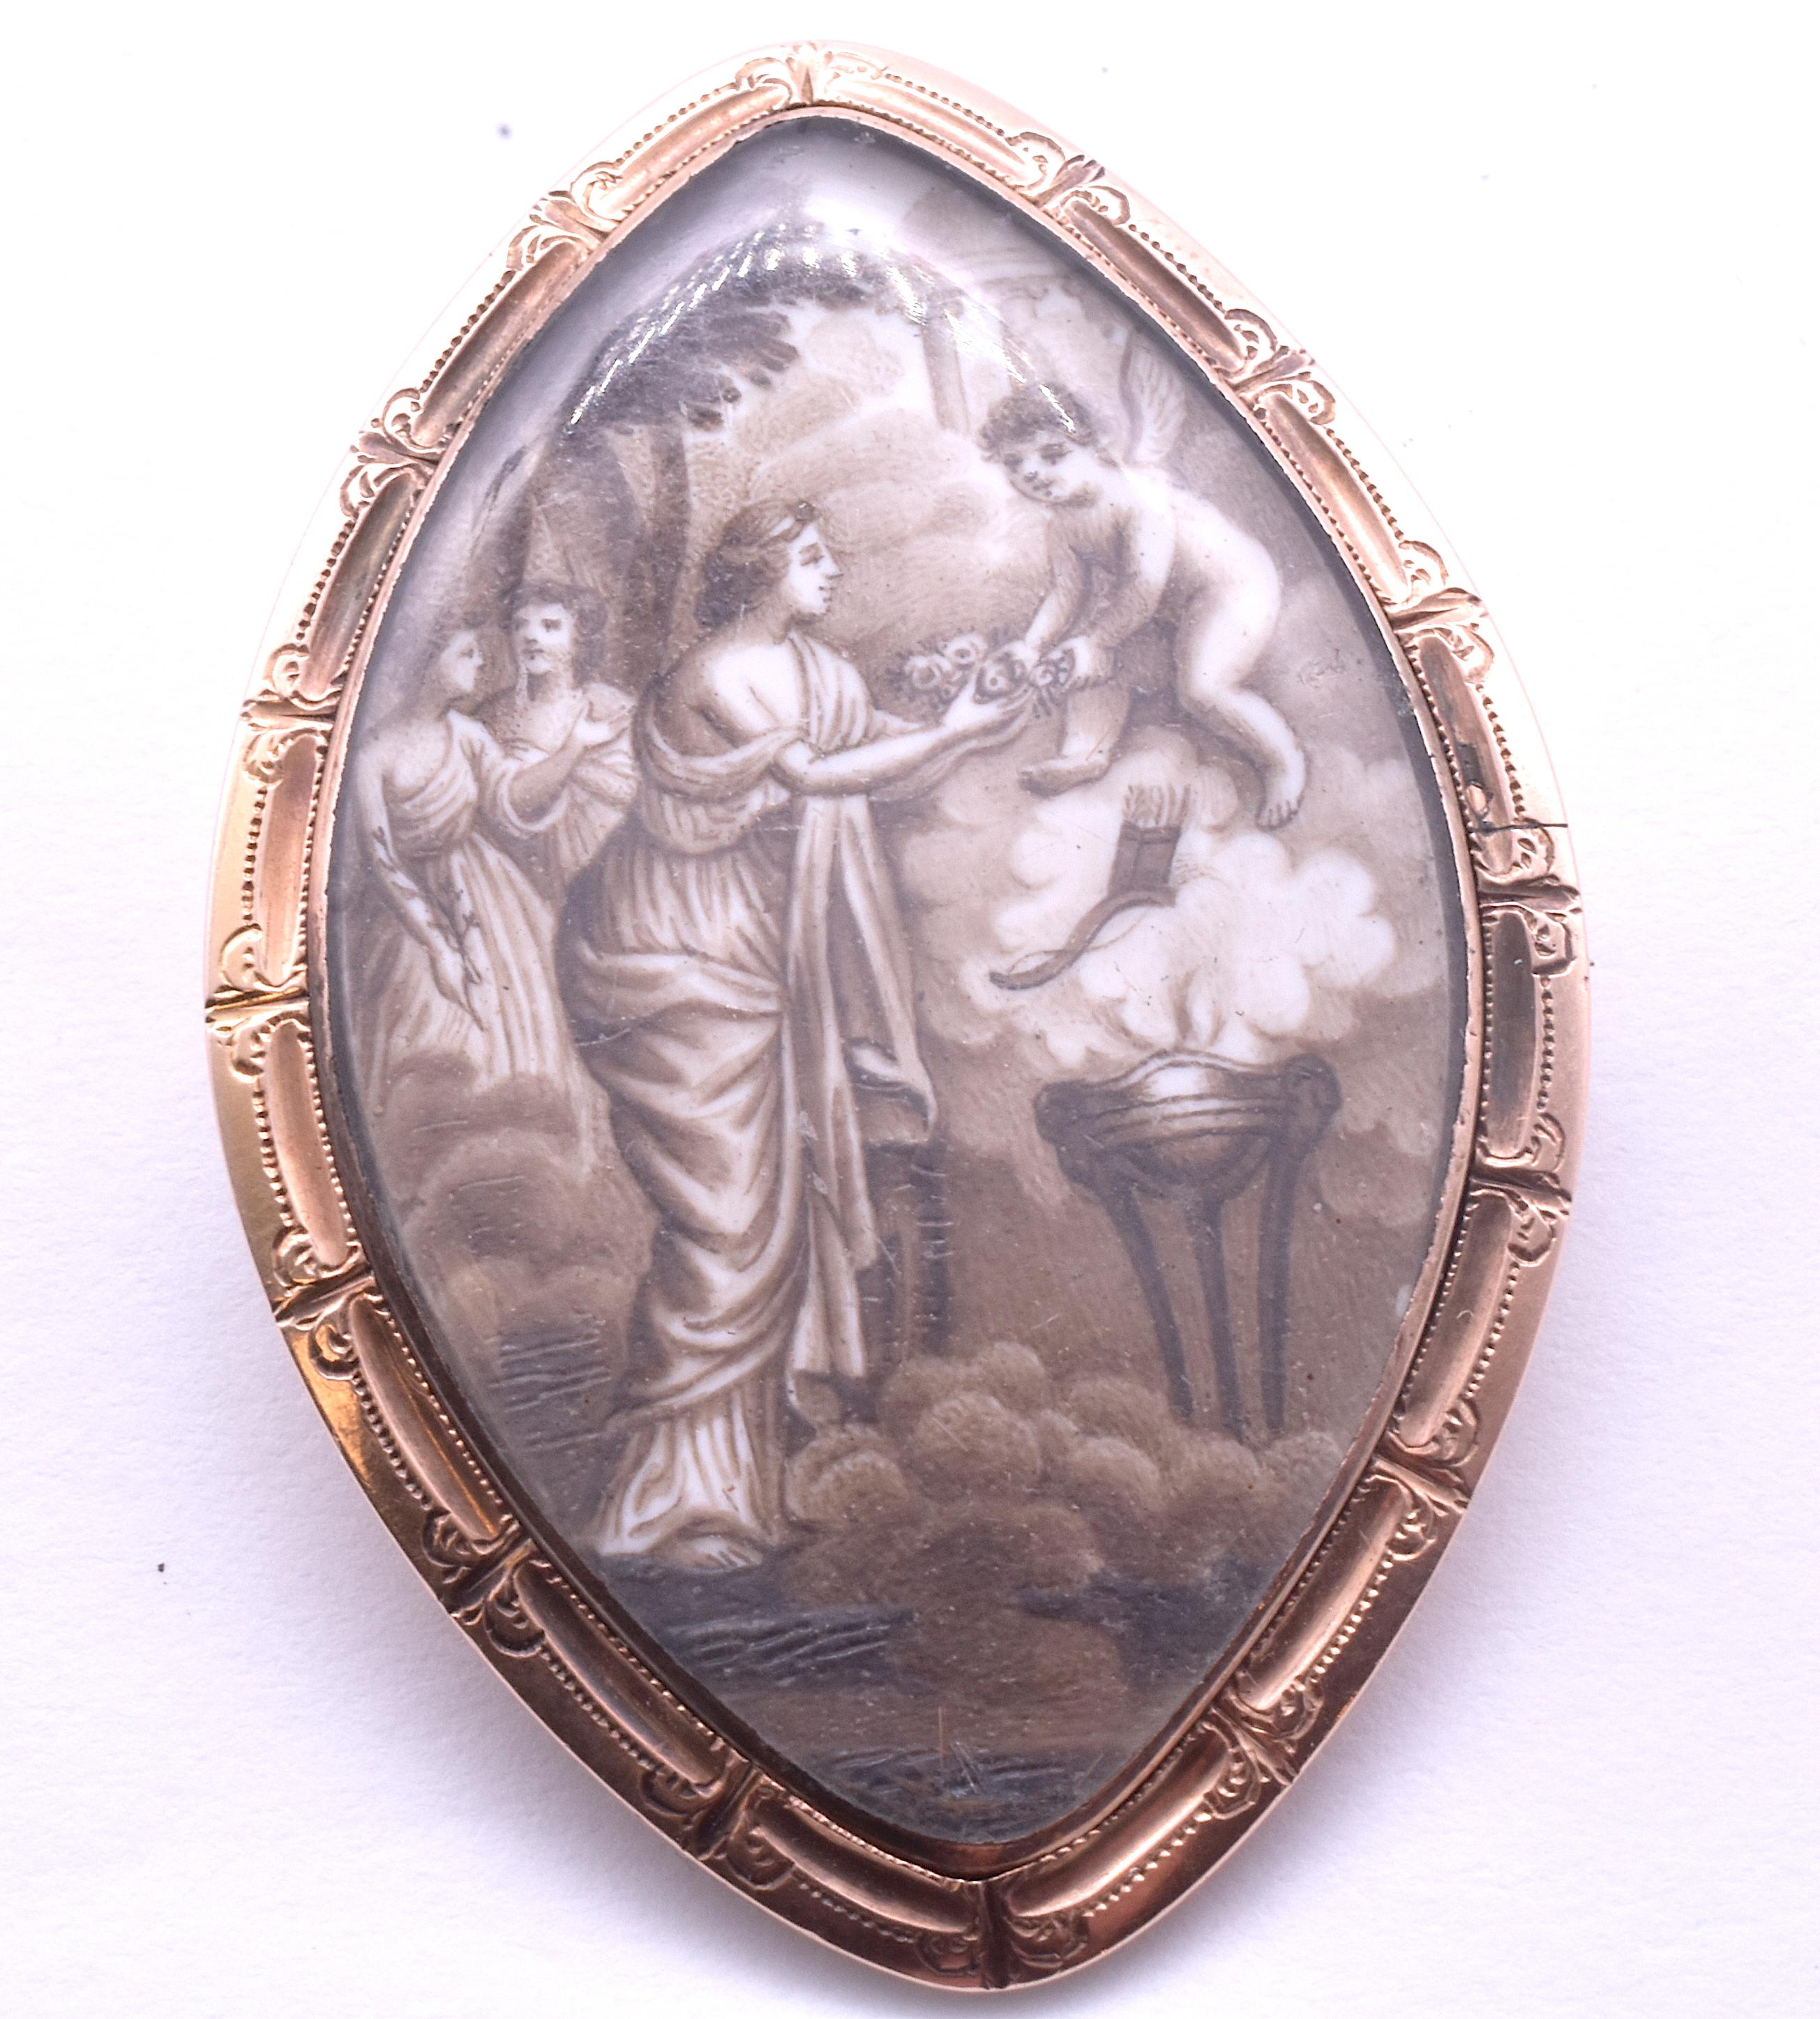 Amazingly detailed sepia painting of Cupid bestowing flowers on a young maiden. This navette shaped brooch, set in 15K gold, was a gift of love. On the reverse side can be seen two shades of hair intertwined, most likely the husband's and wife's,